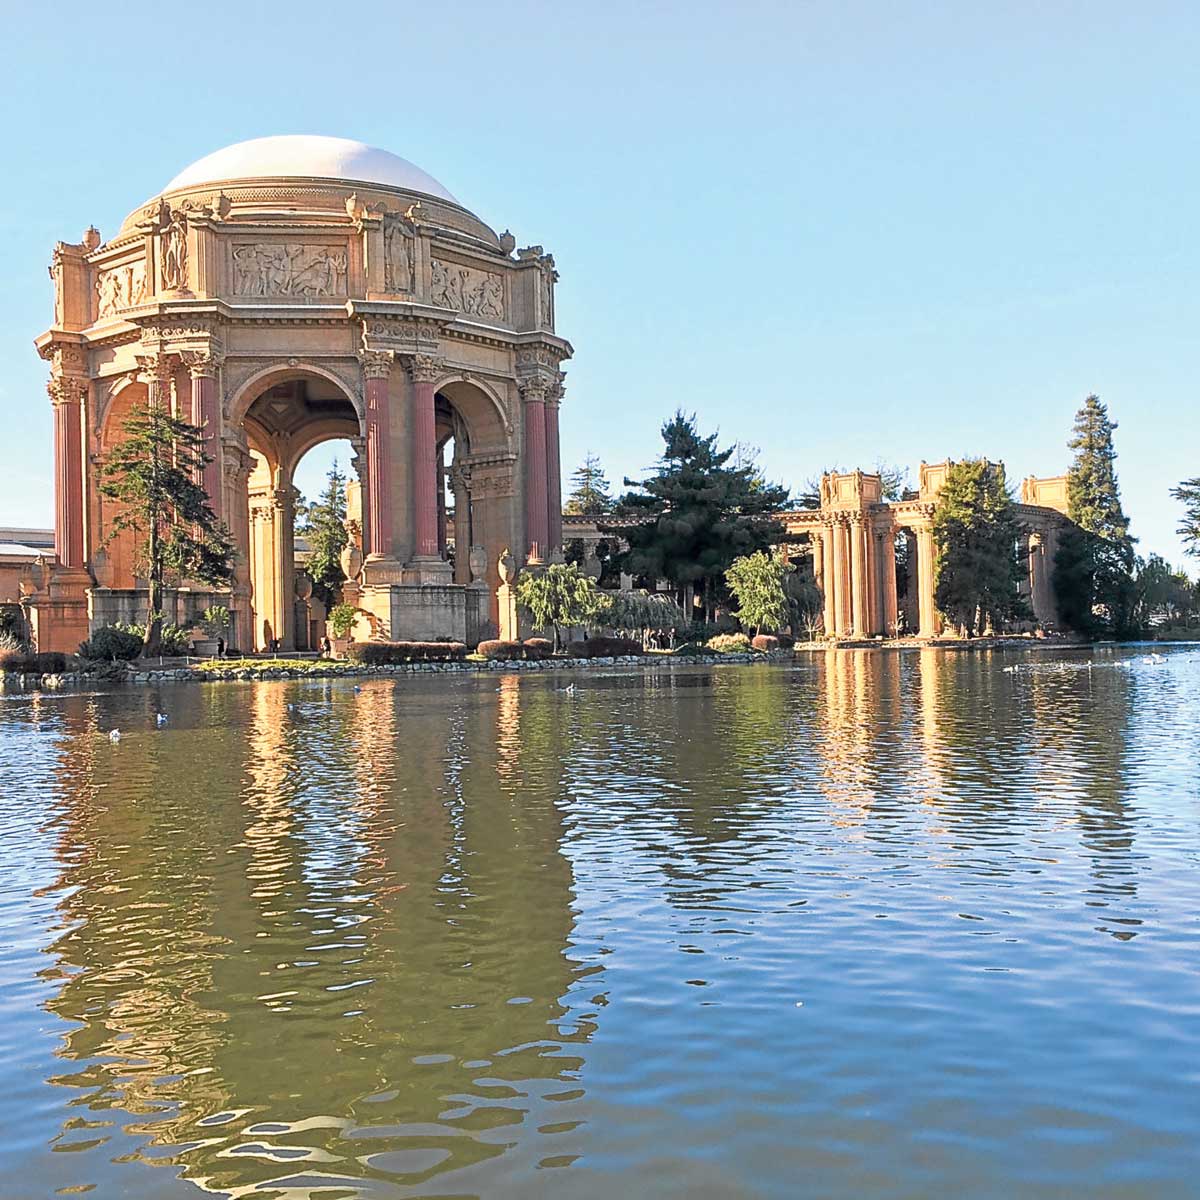 Beaux-Arts Architecture - Palace of Fine Arts in San Francisco